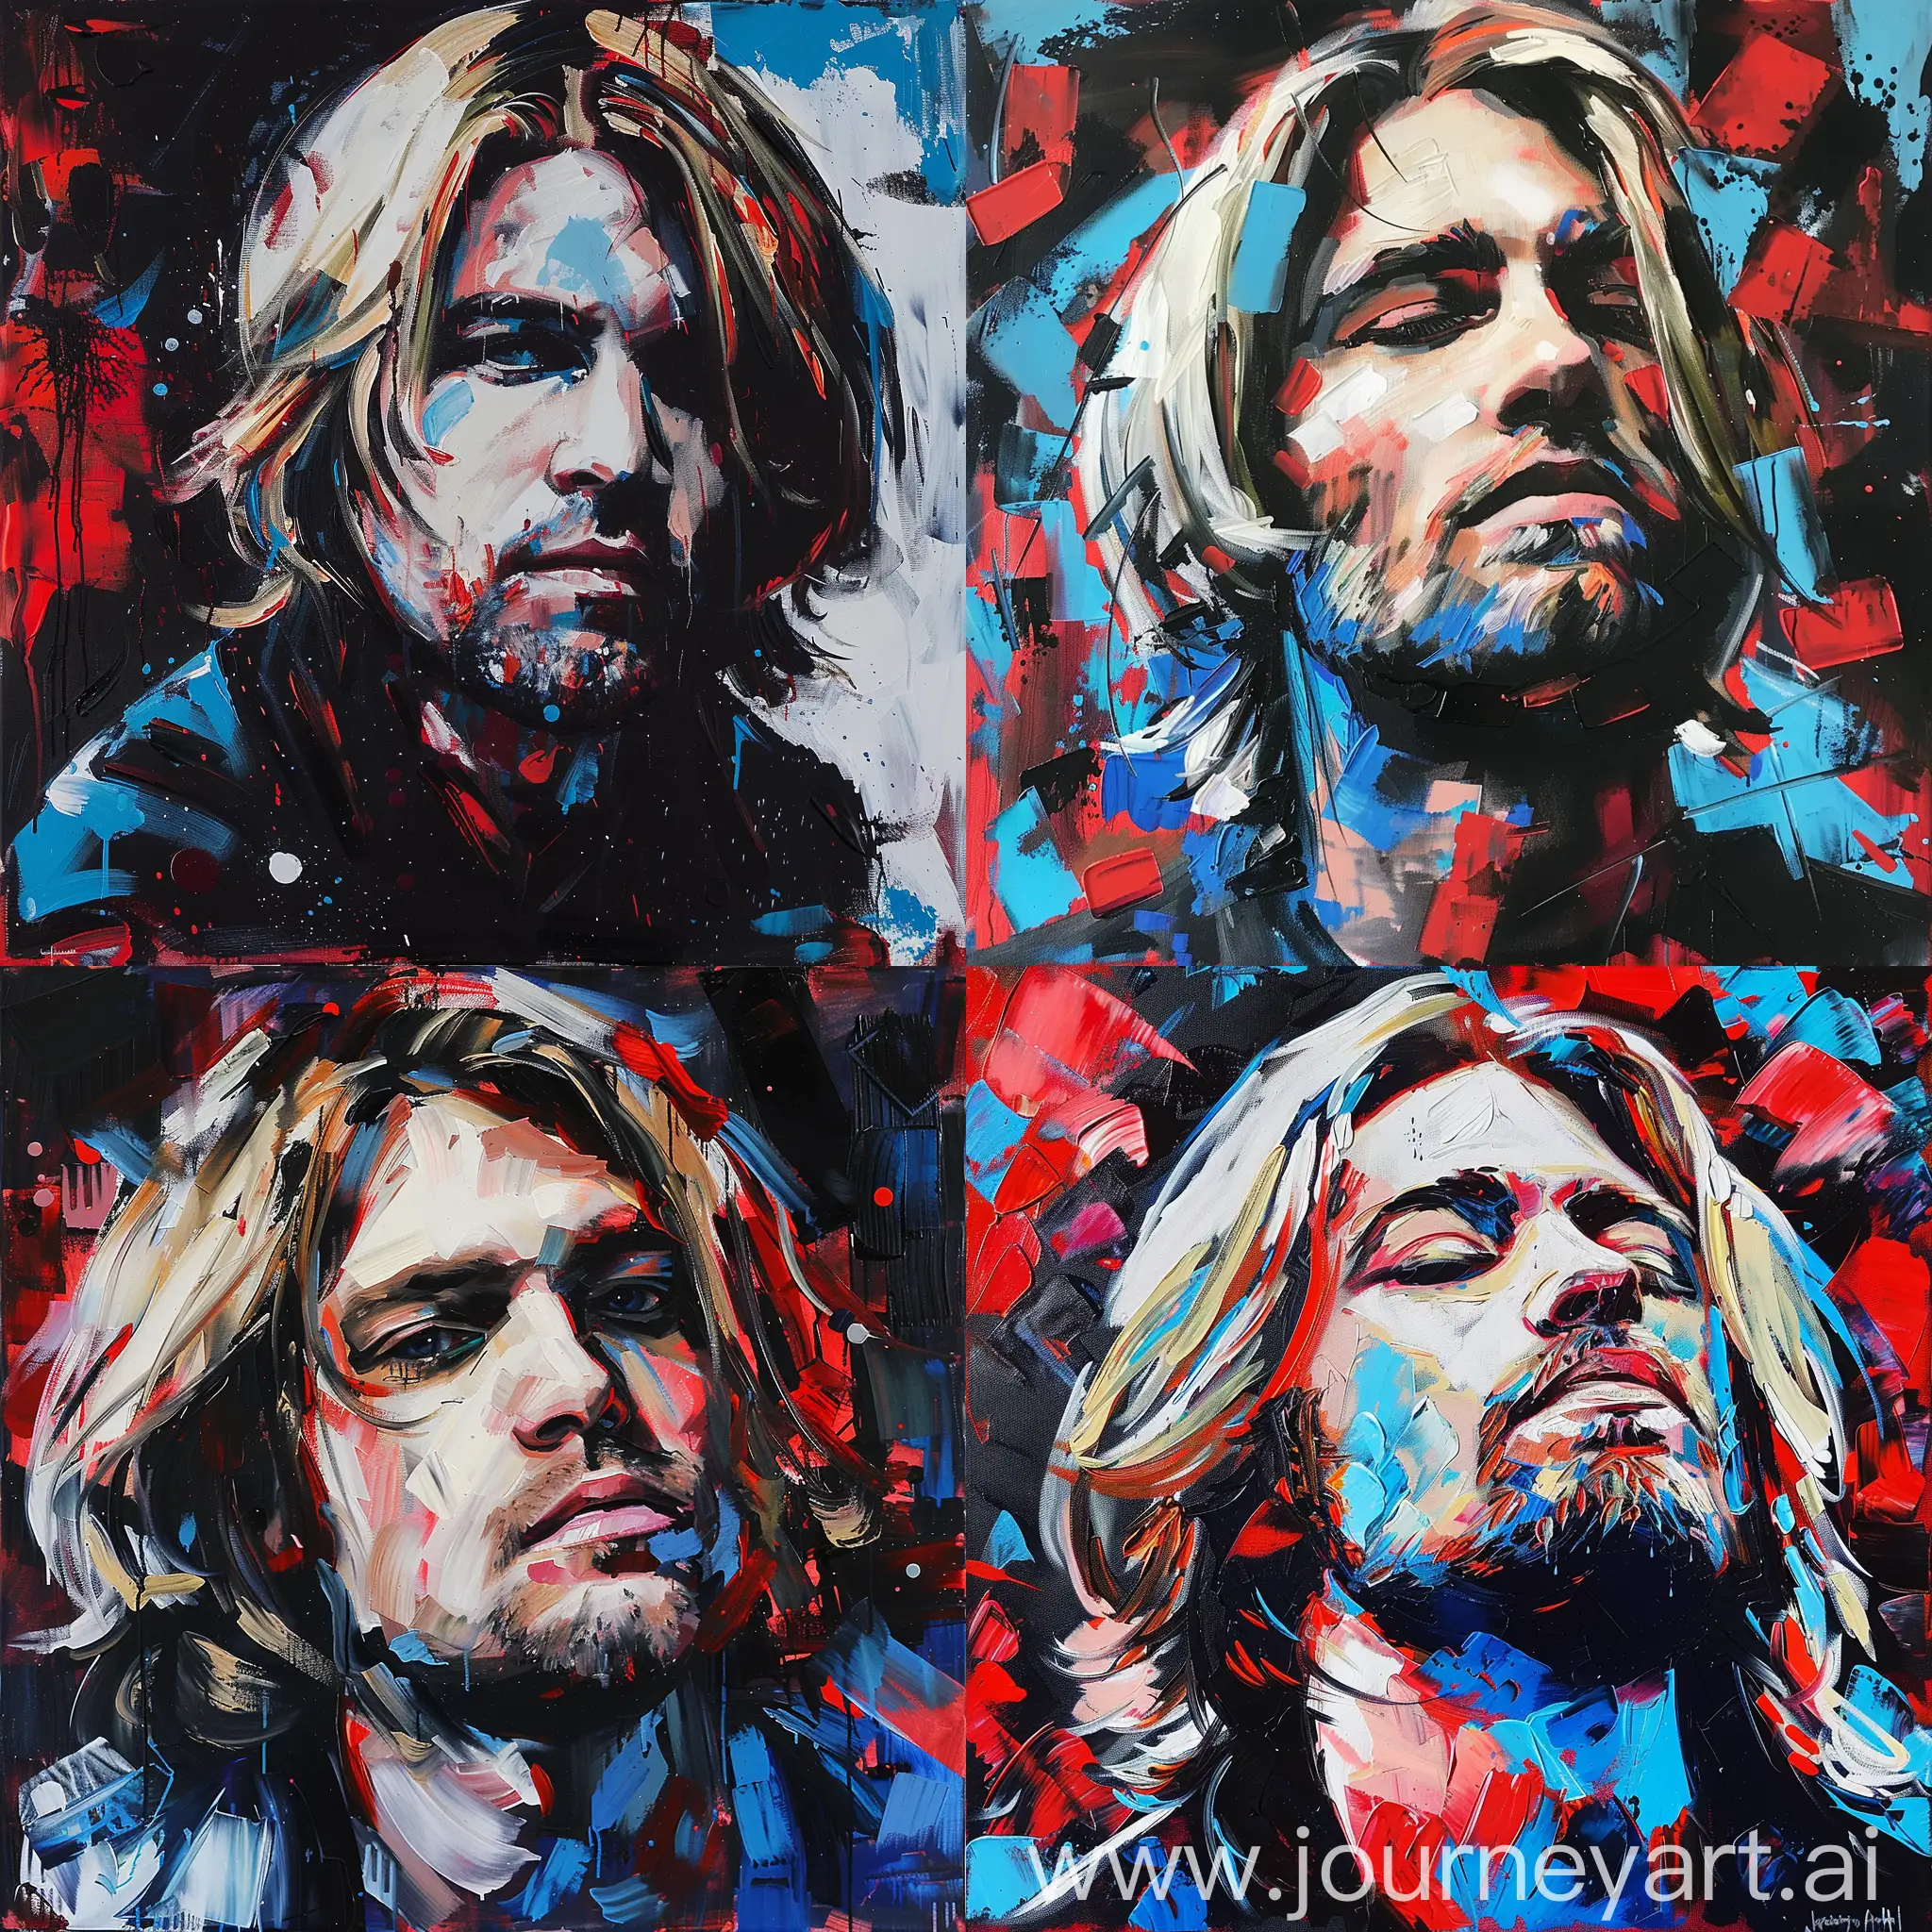 Vibrant-Oil-Painting-of-Kurt-Cobain-in-Star-Wars-Style